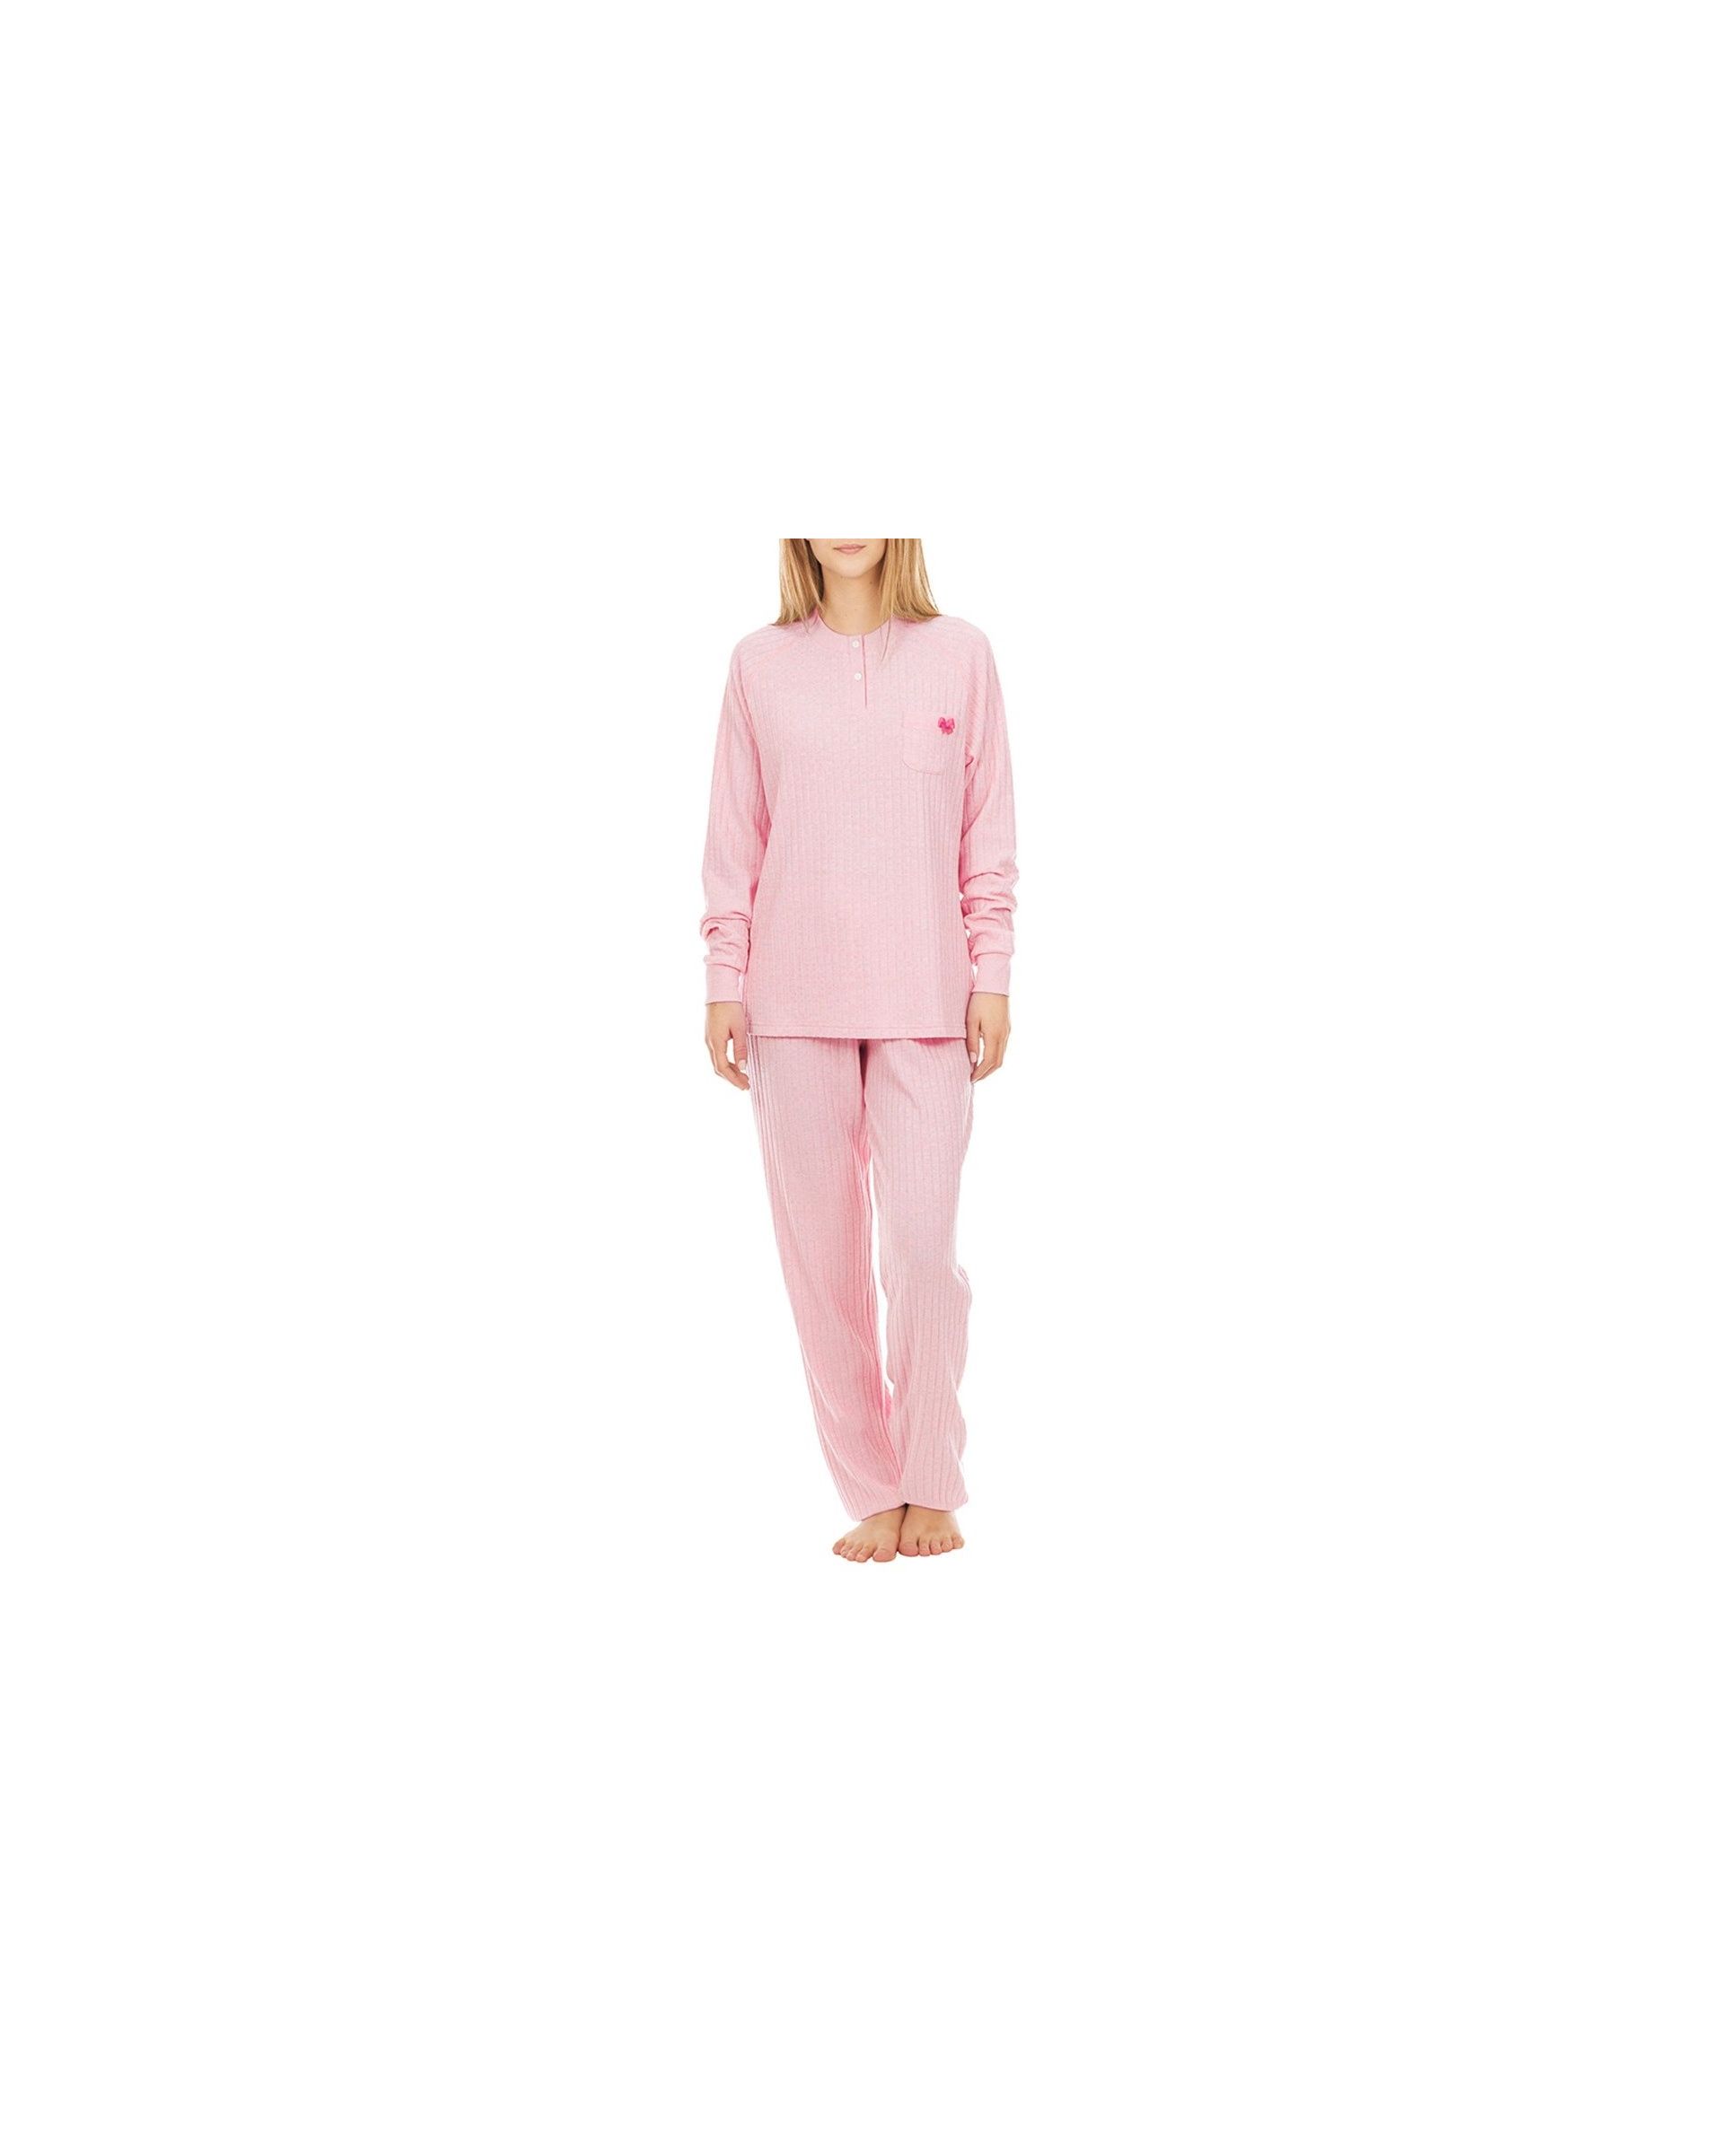 Women's long pyjamas ribbed round neck with buttons